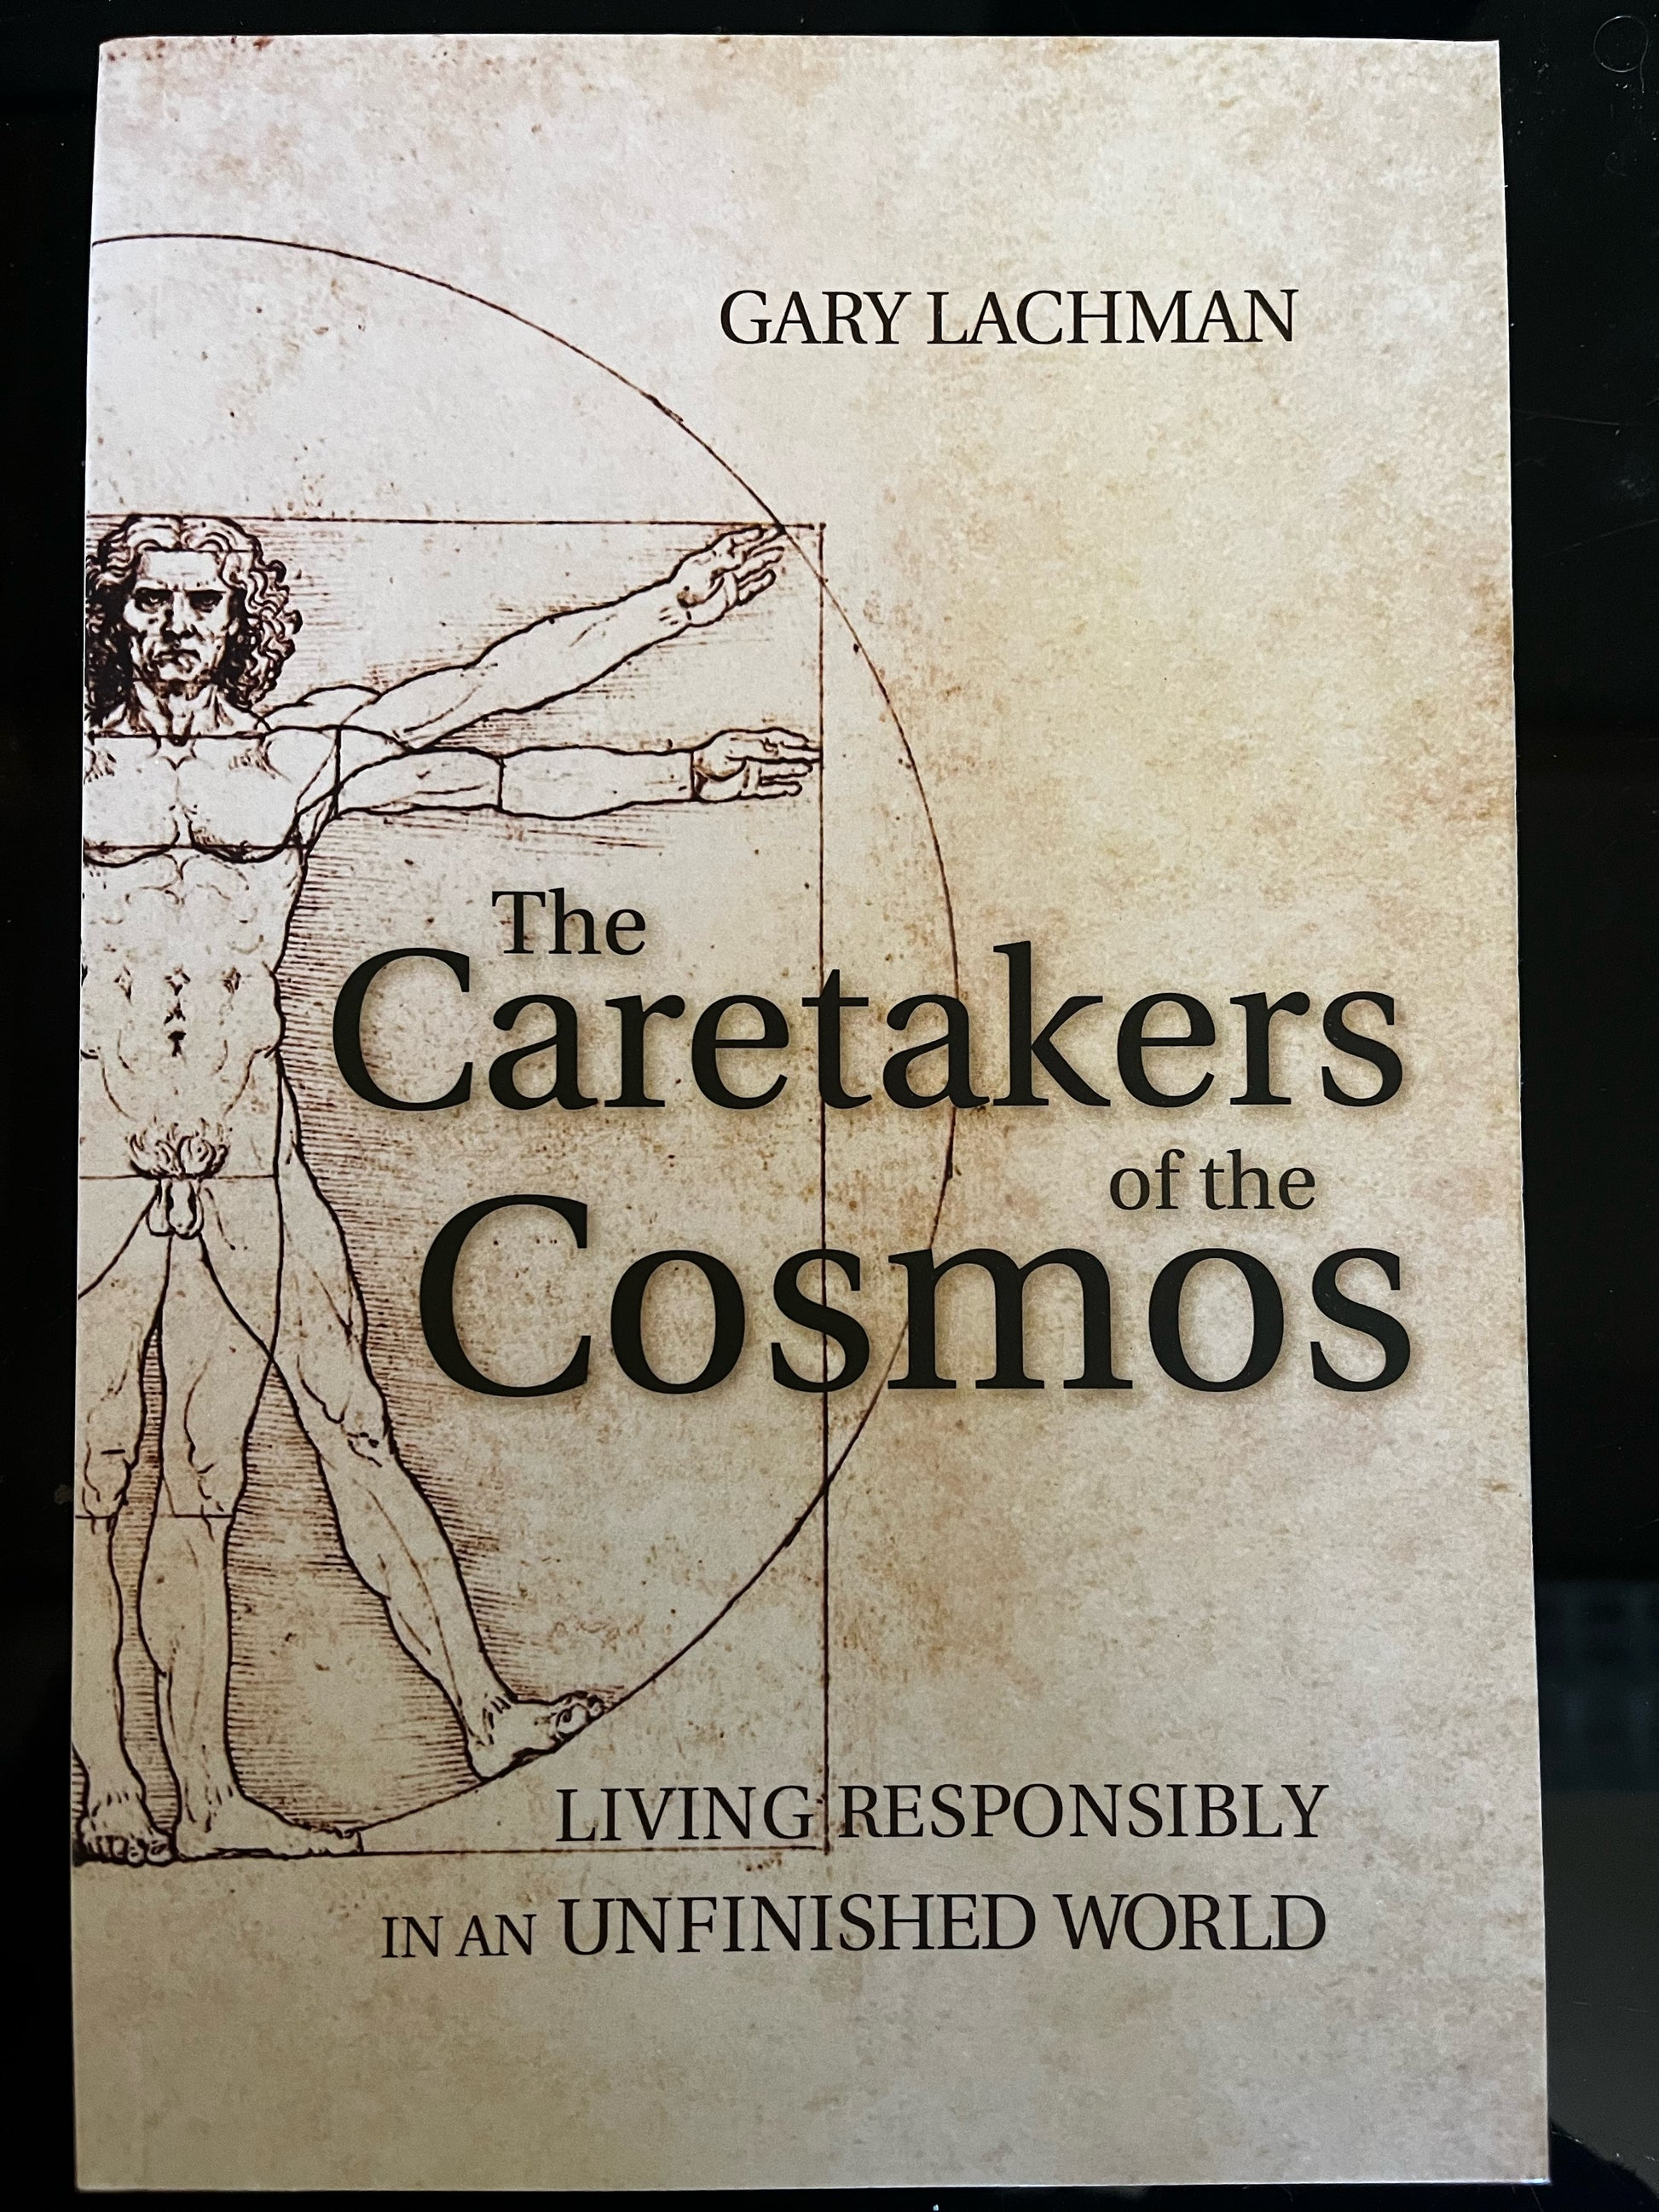 The Caretakers of the Cosmos by Gary Lachman - The Josephine Porter Institute